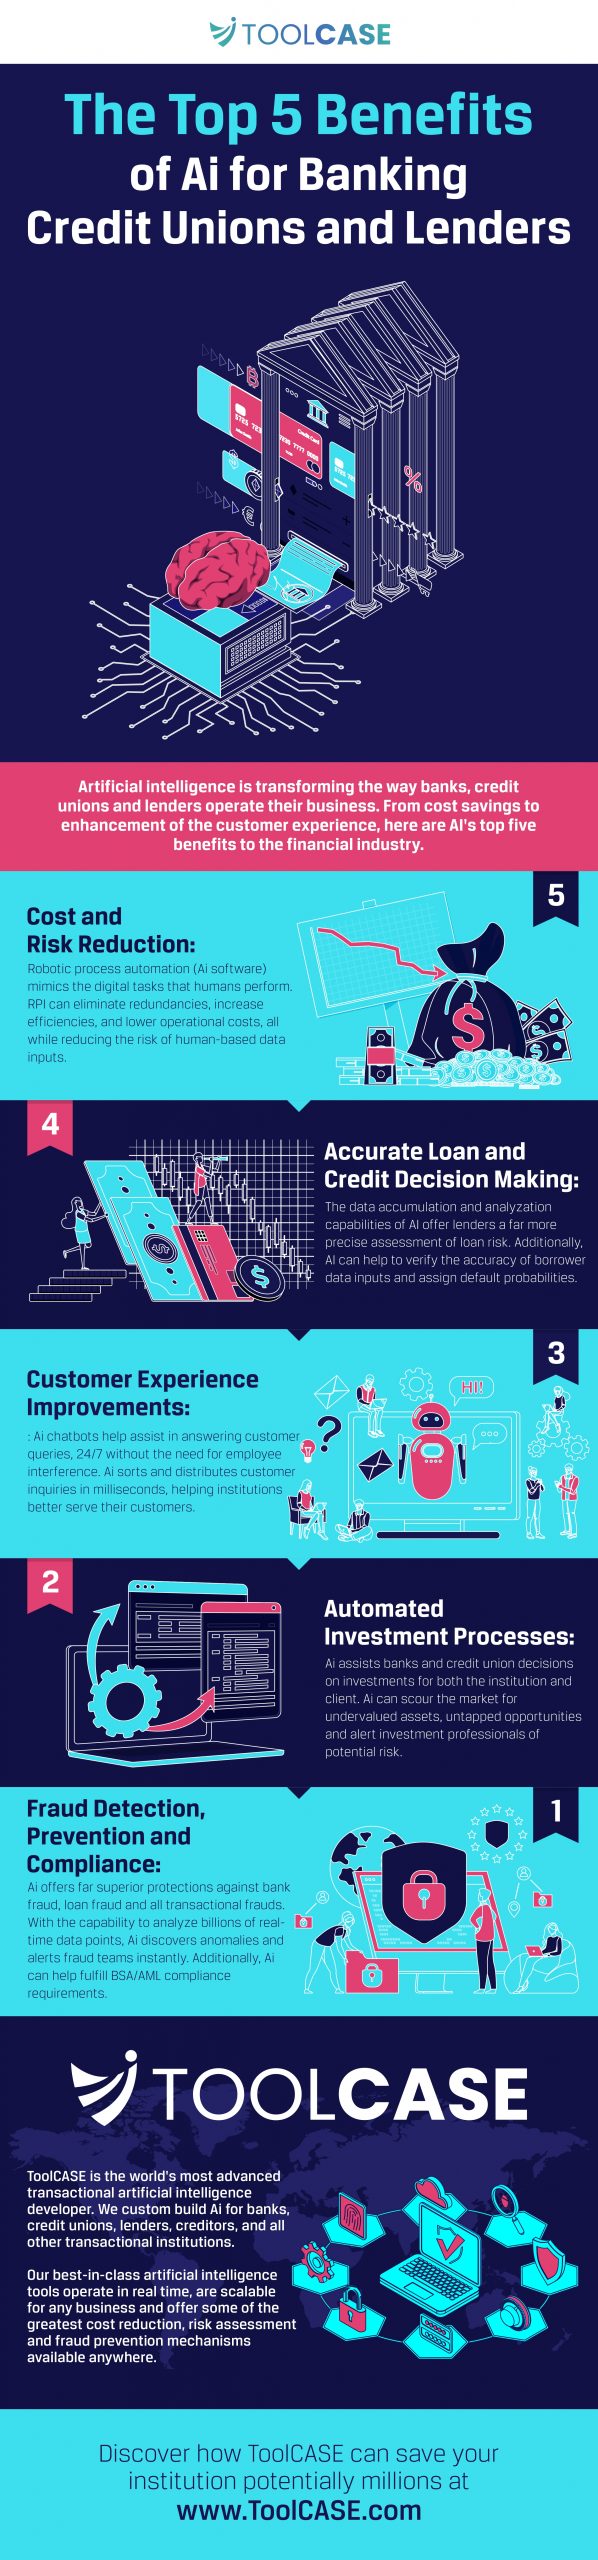 The Top 5 Benefits of Ai for Banking Credit Unions and Lenders